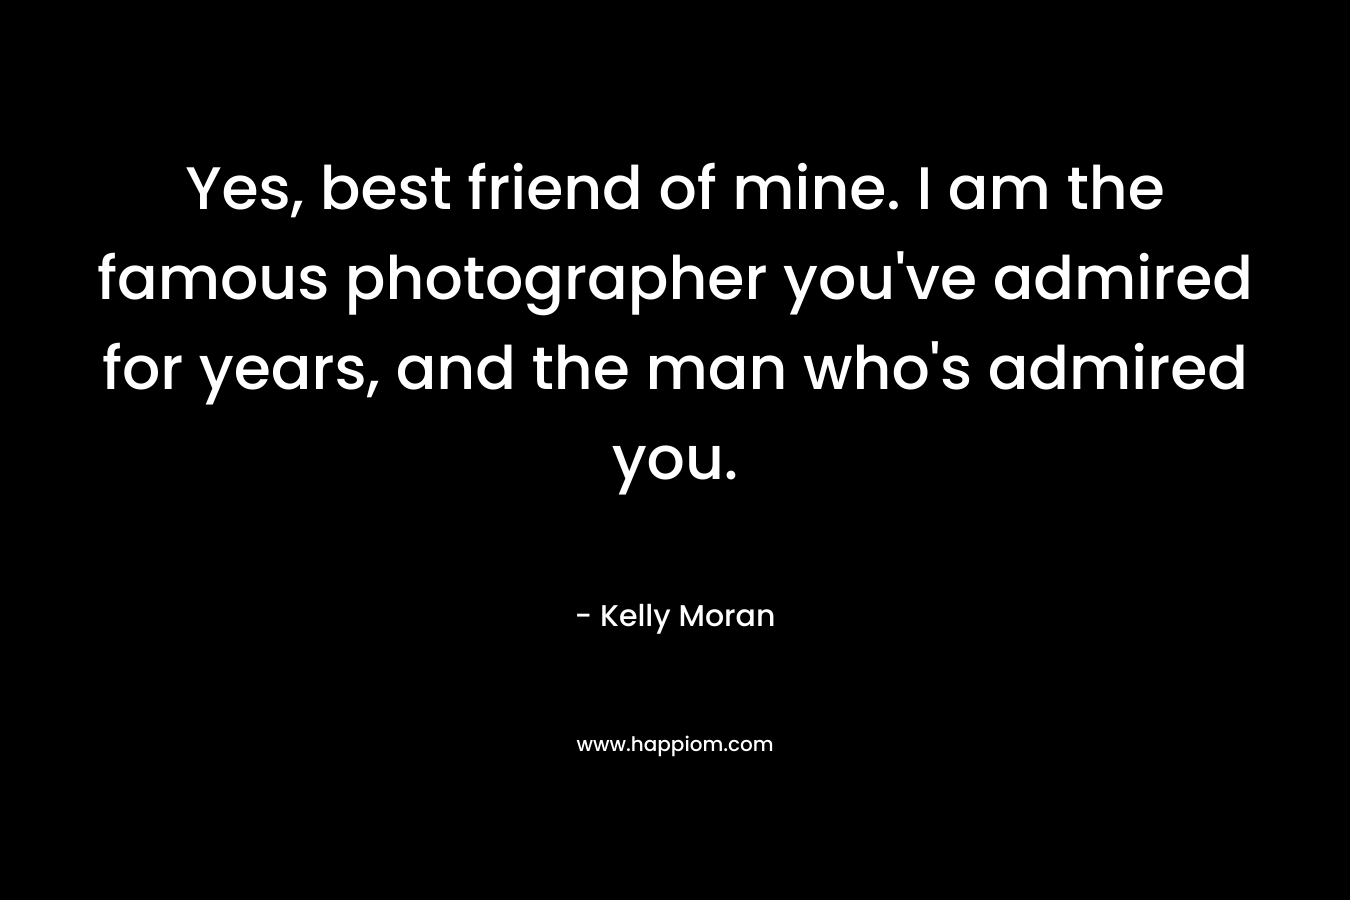 Yes, best friend of mine. I am the famous photographer you’ve admired for years, and the man who’s admired you. – Kelly Moran